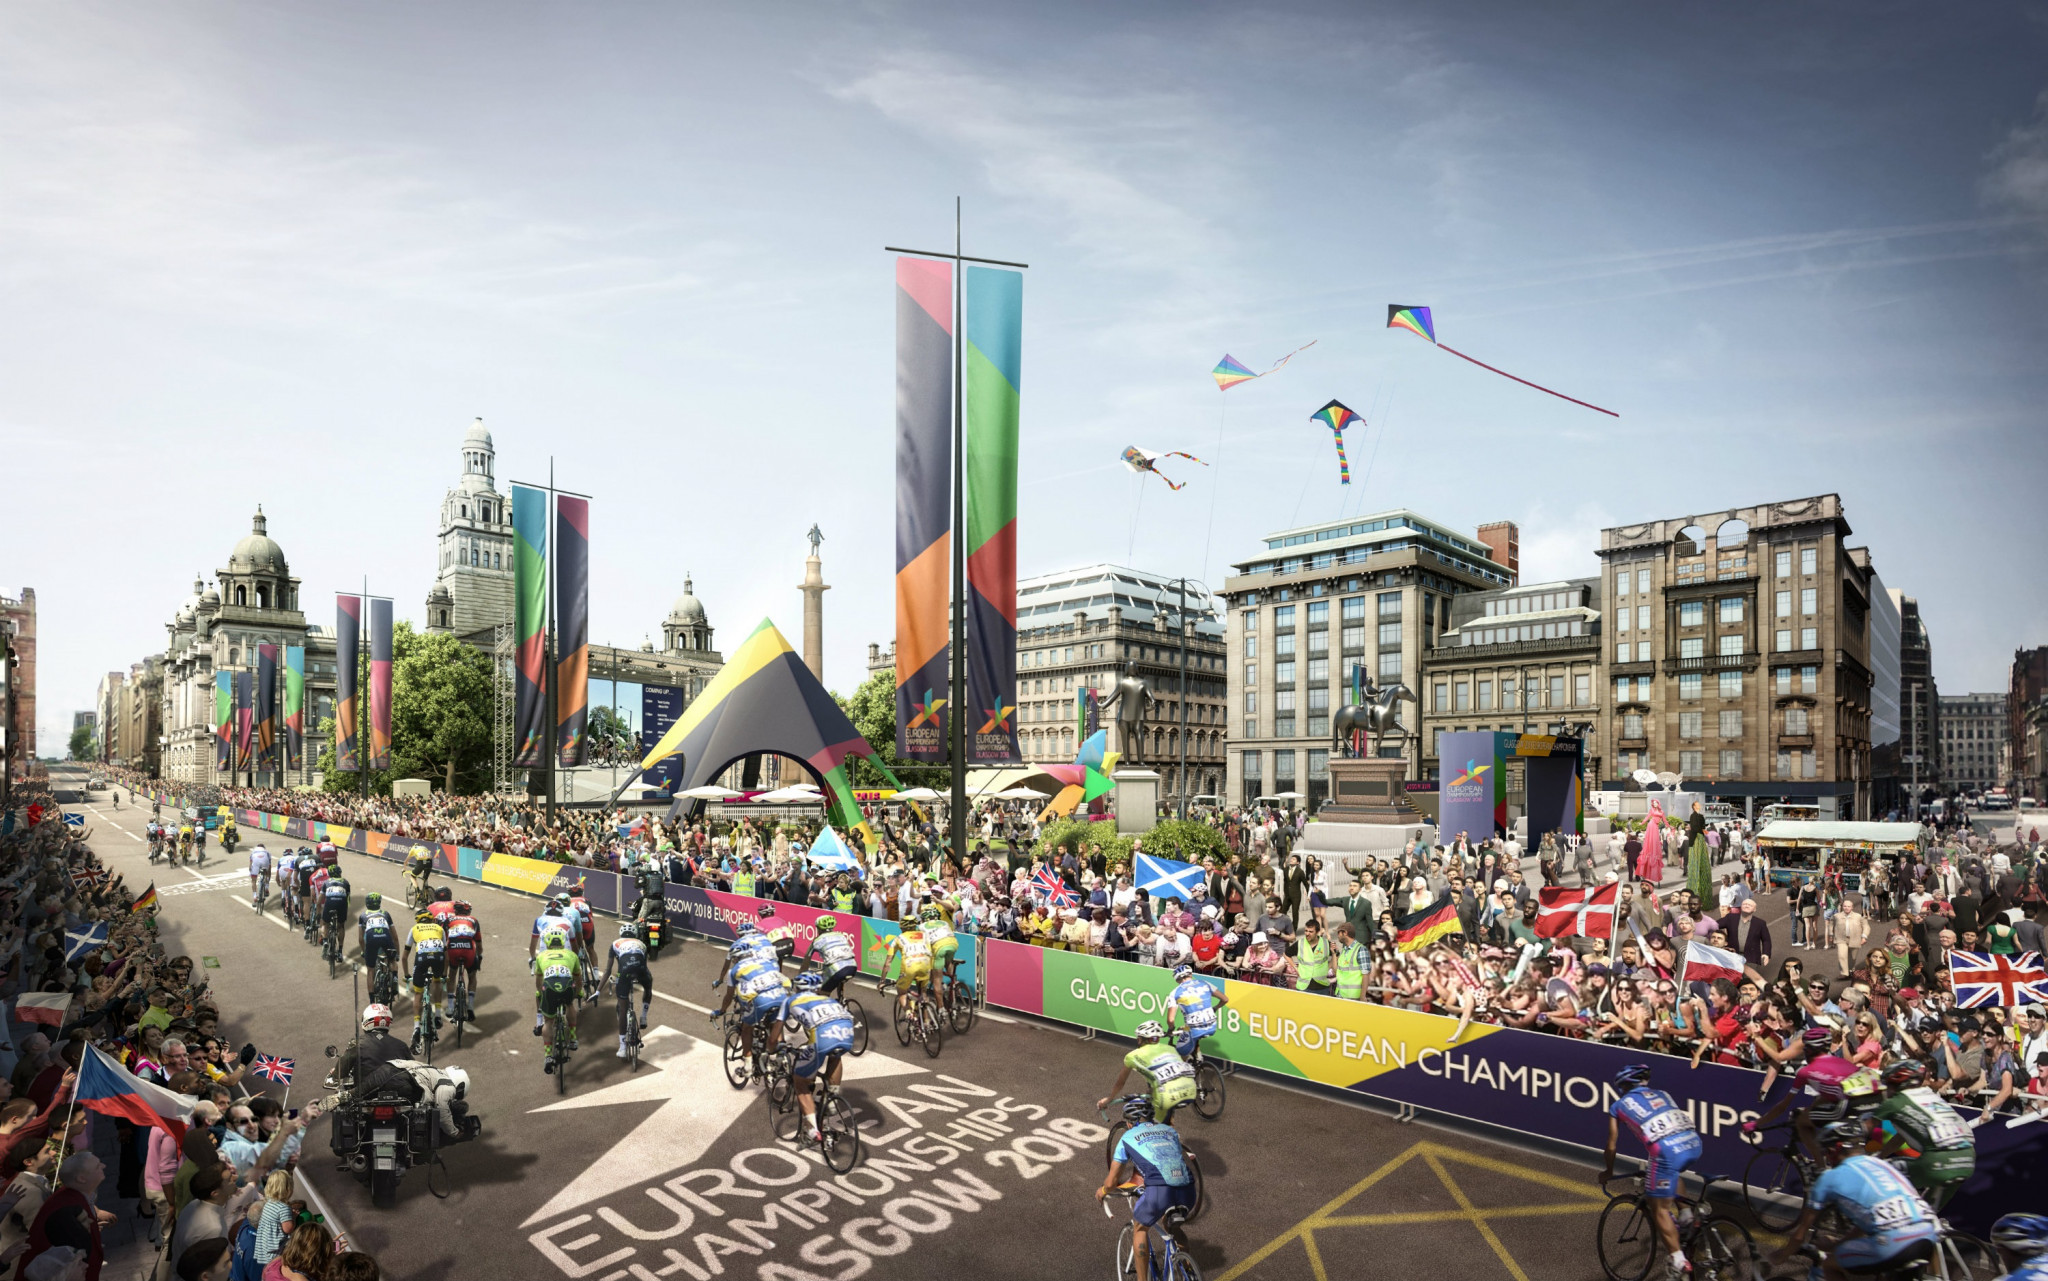 One million residents, visitors, spectators, athletes and media are set to be part of the sporting and cultural experience of the Glasgow 2018 European Championships ©Glasgow 2018